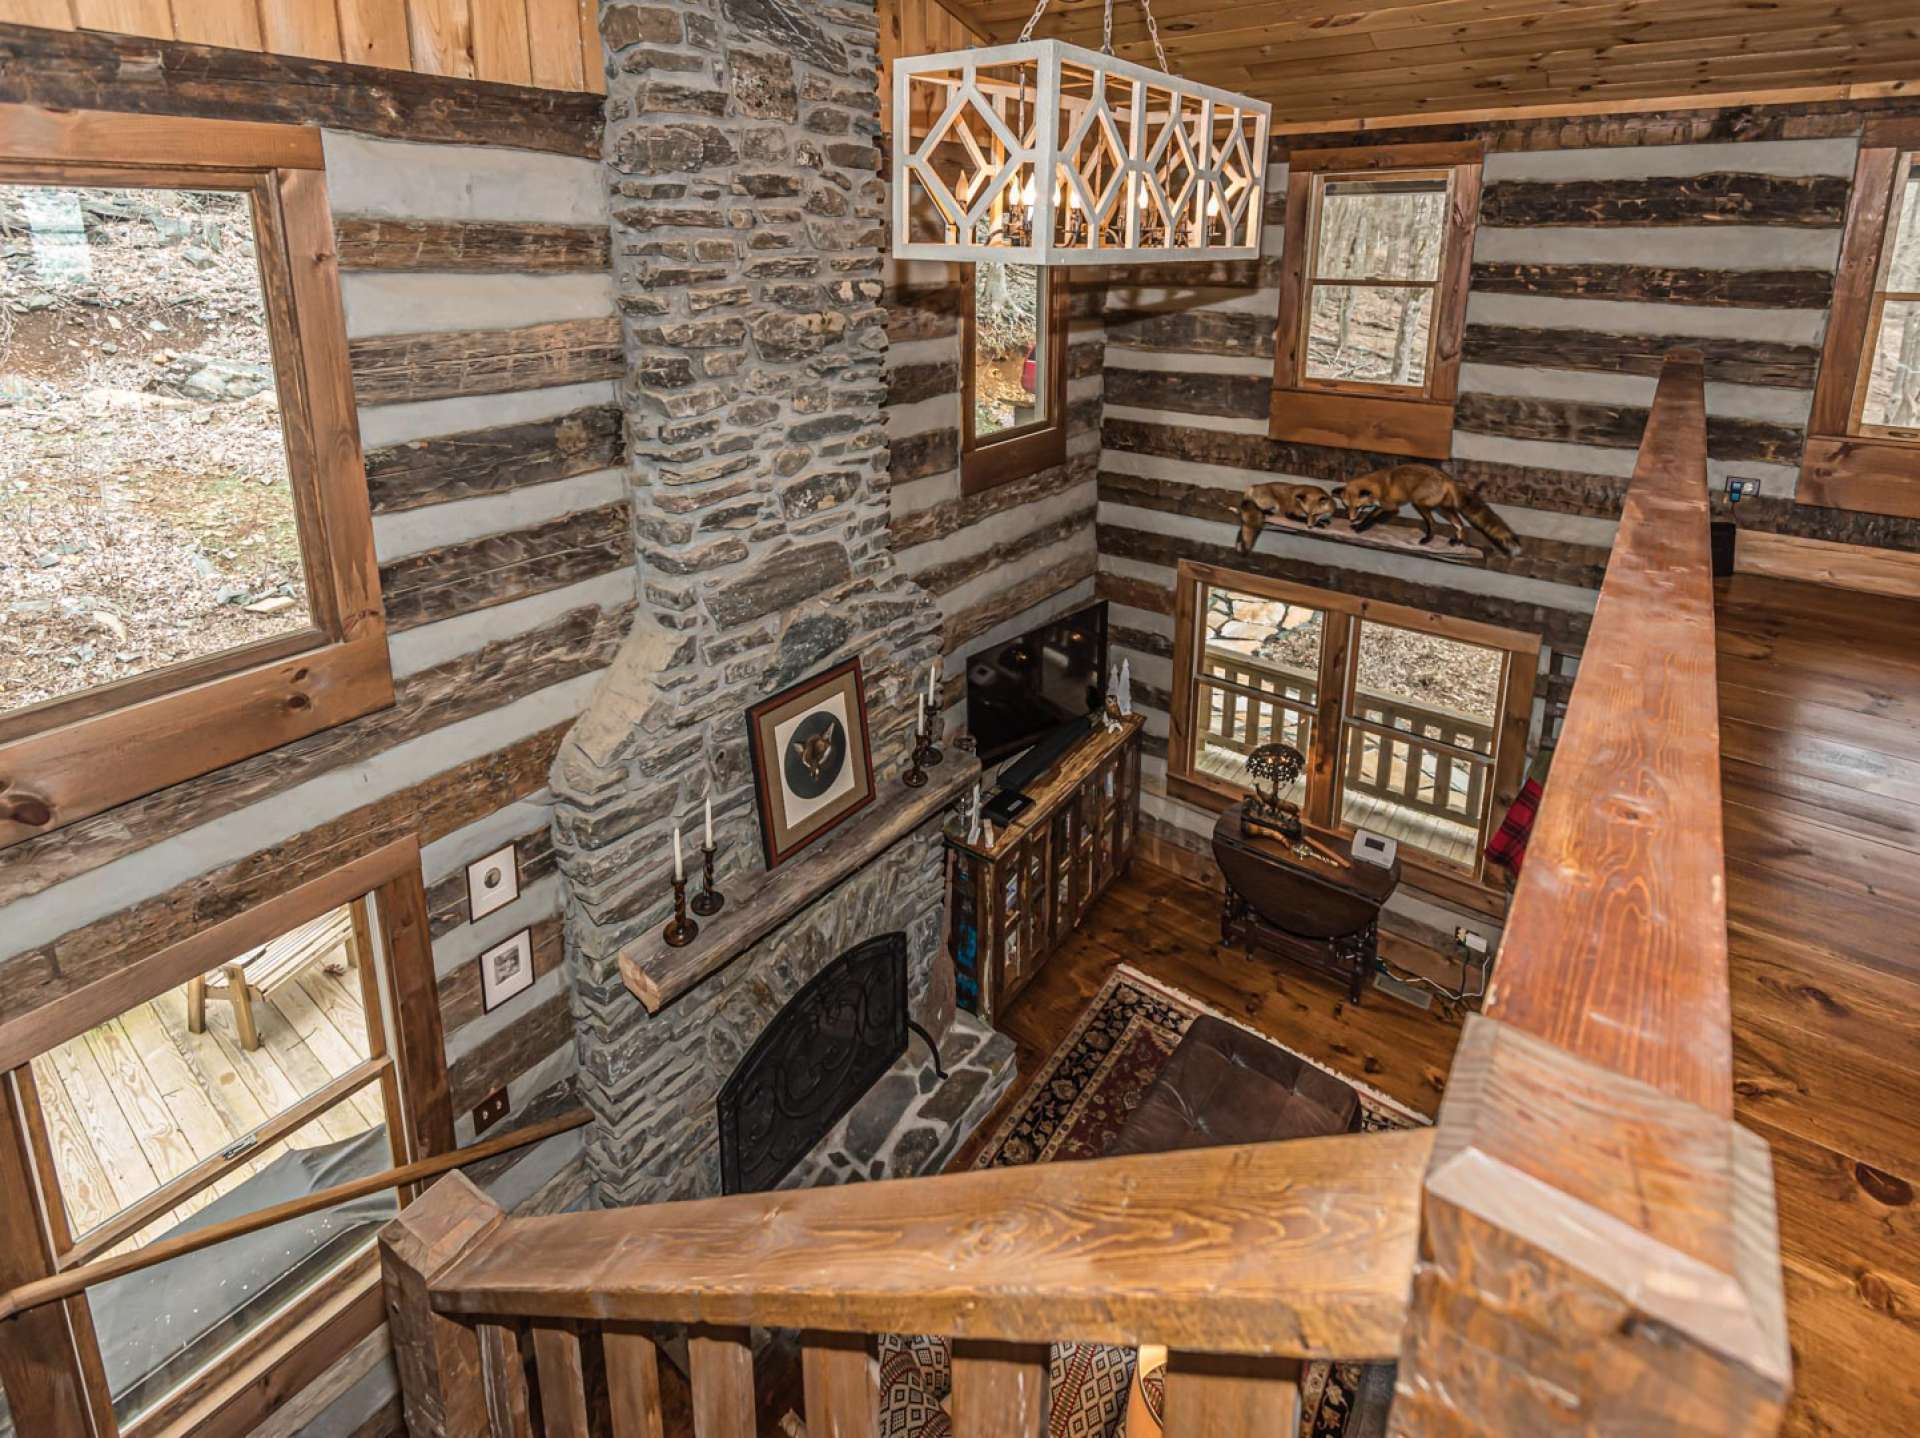 View of the great room from the top of the stairs. Notice the rustic yet elegant lighting provided throughout the cabin.